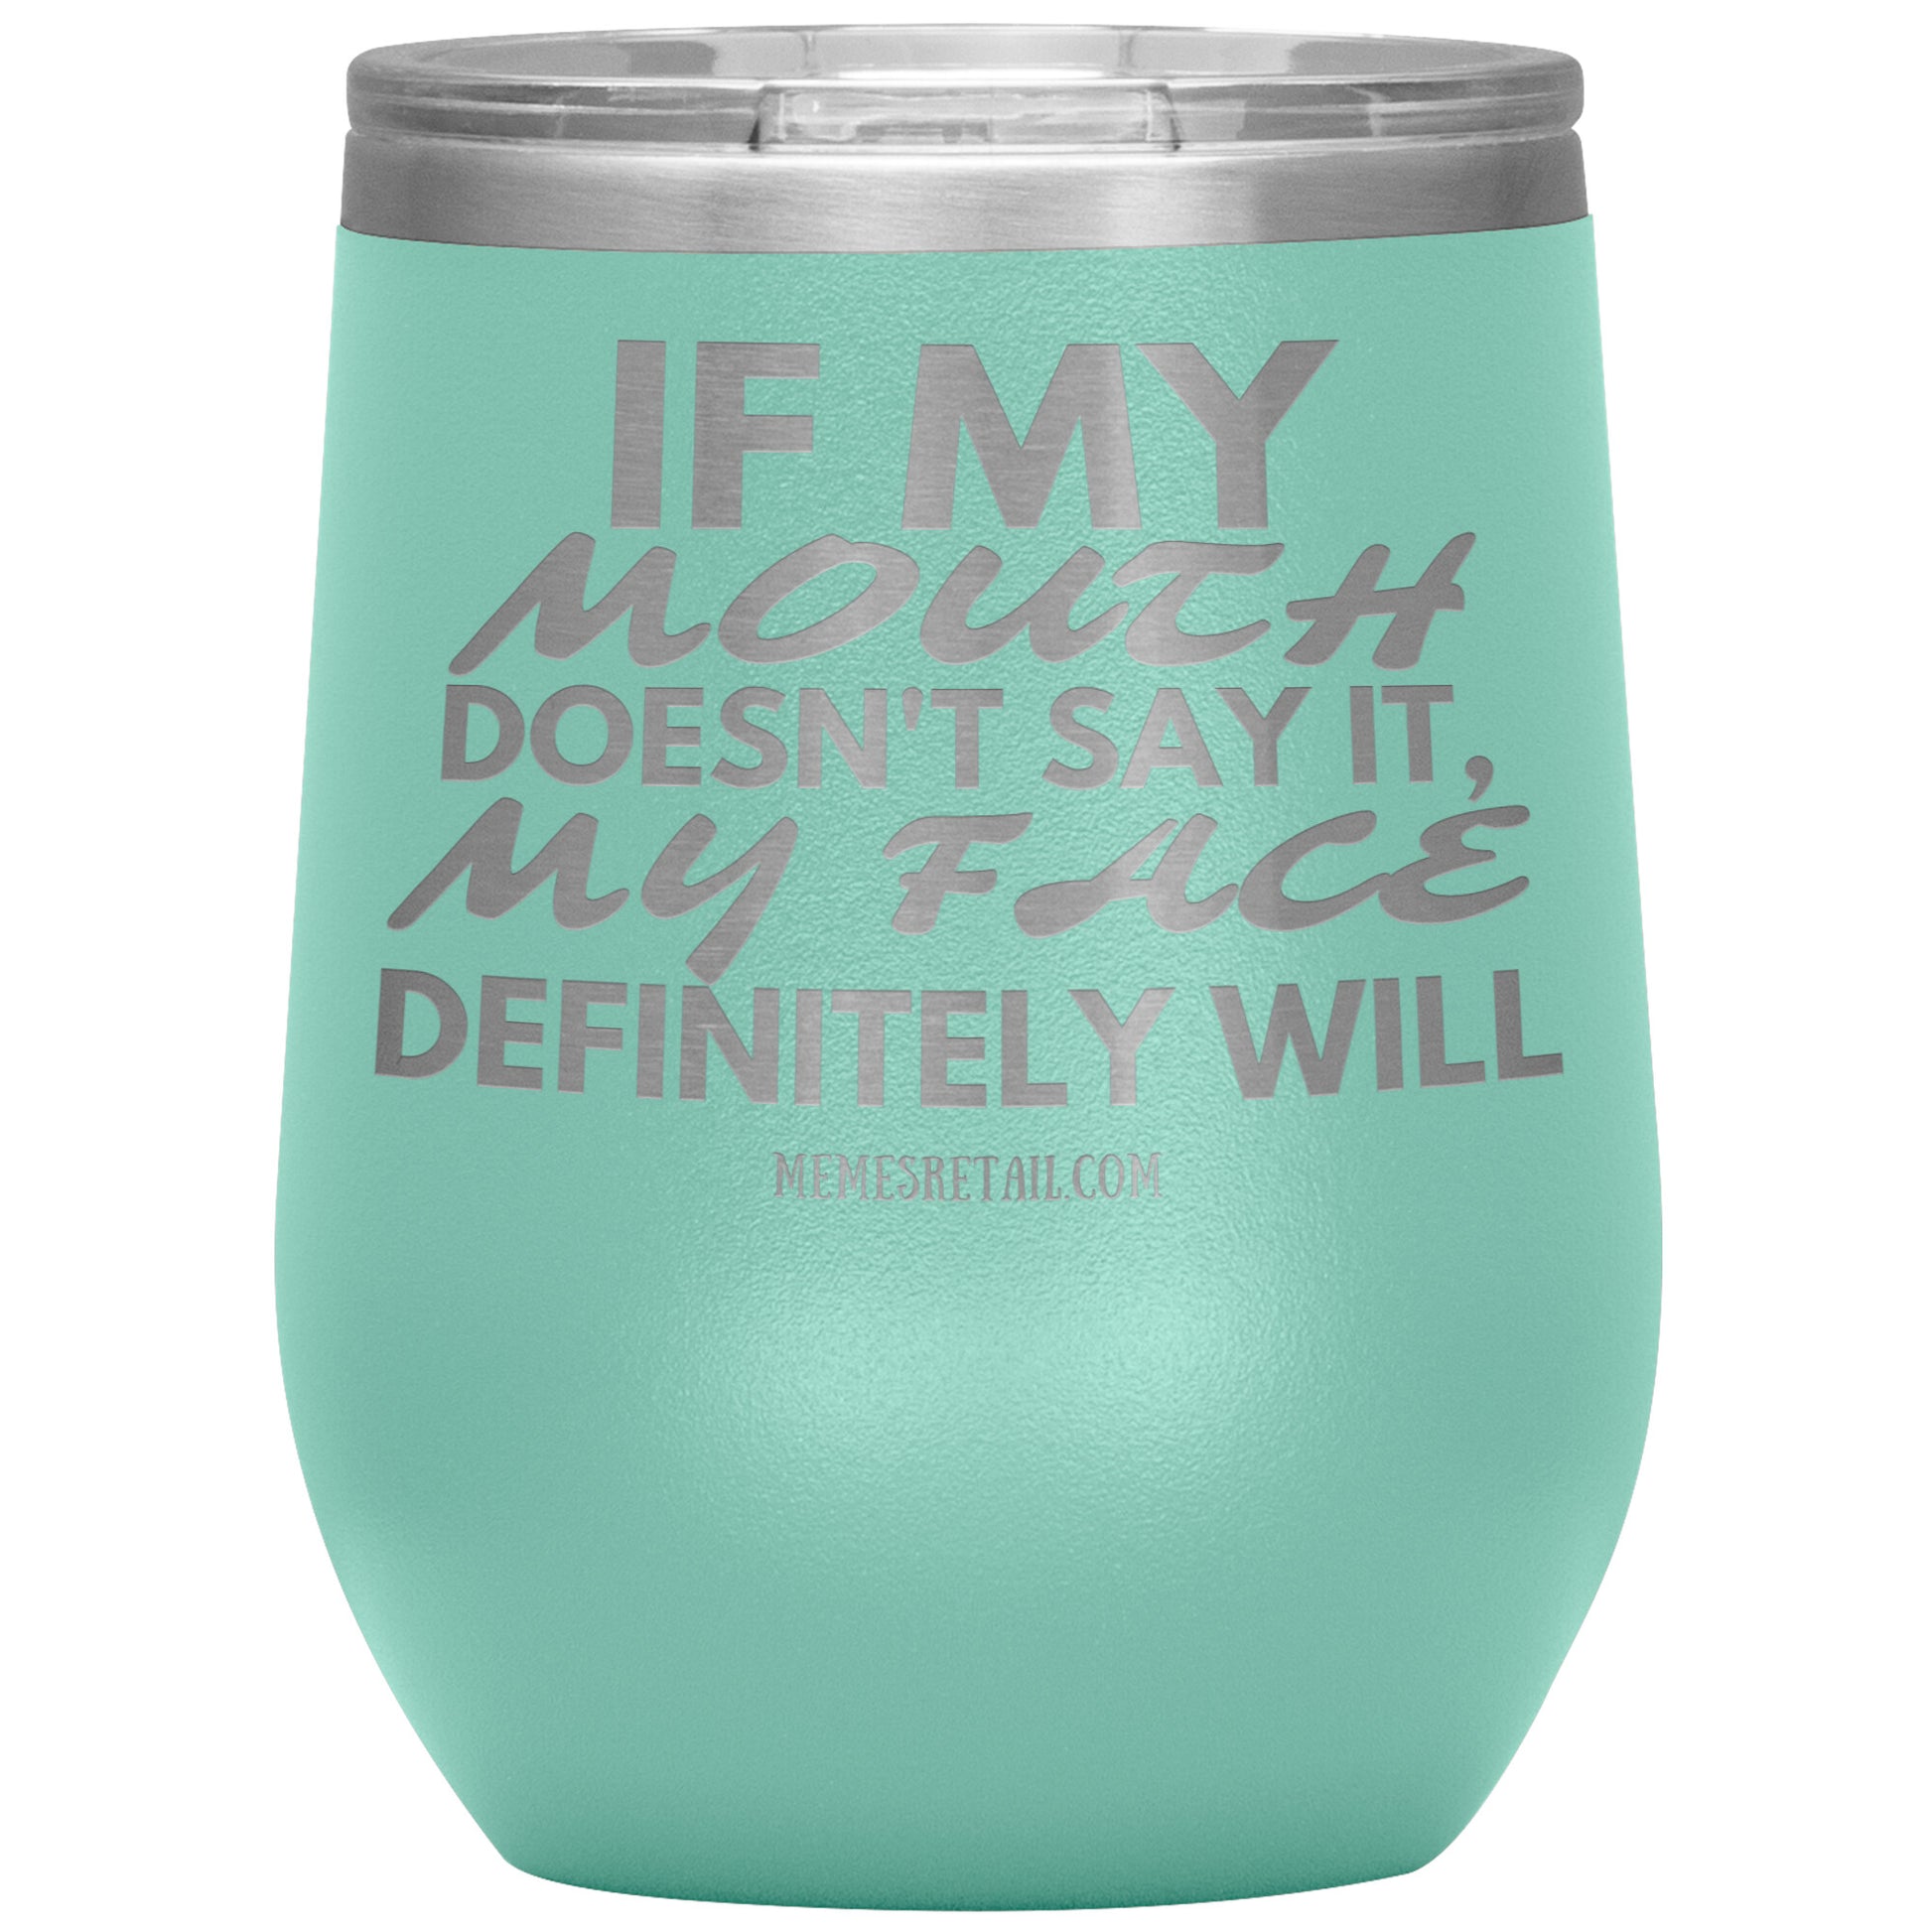 If my mouth doesn't say it, my face definitely will Tumblers, 12oz Wine Insulated Tumbler / Teal - MemesRetail.com